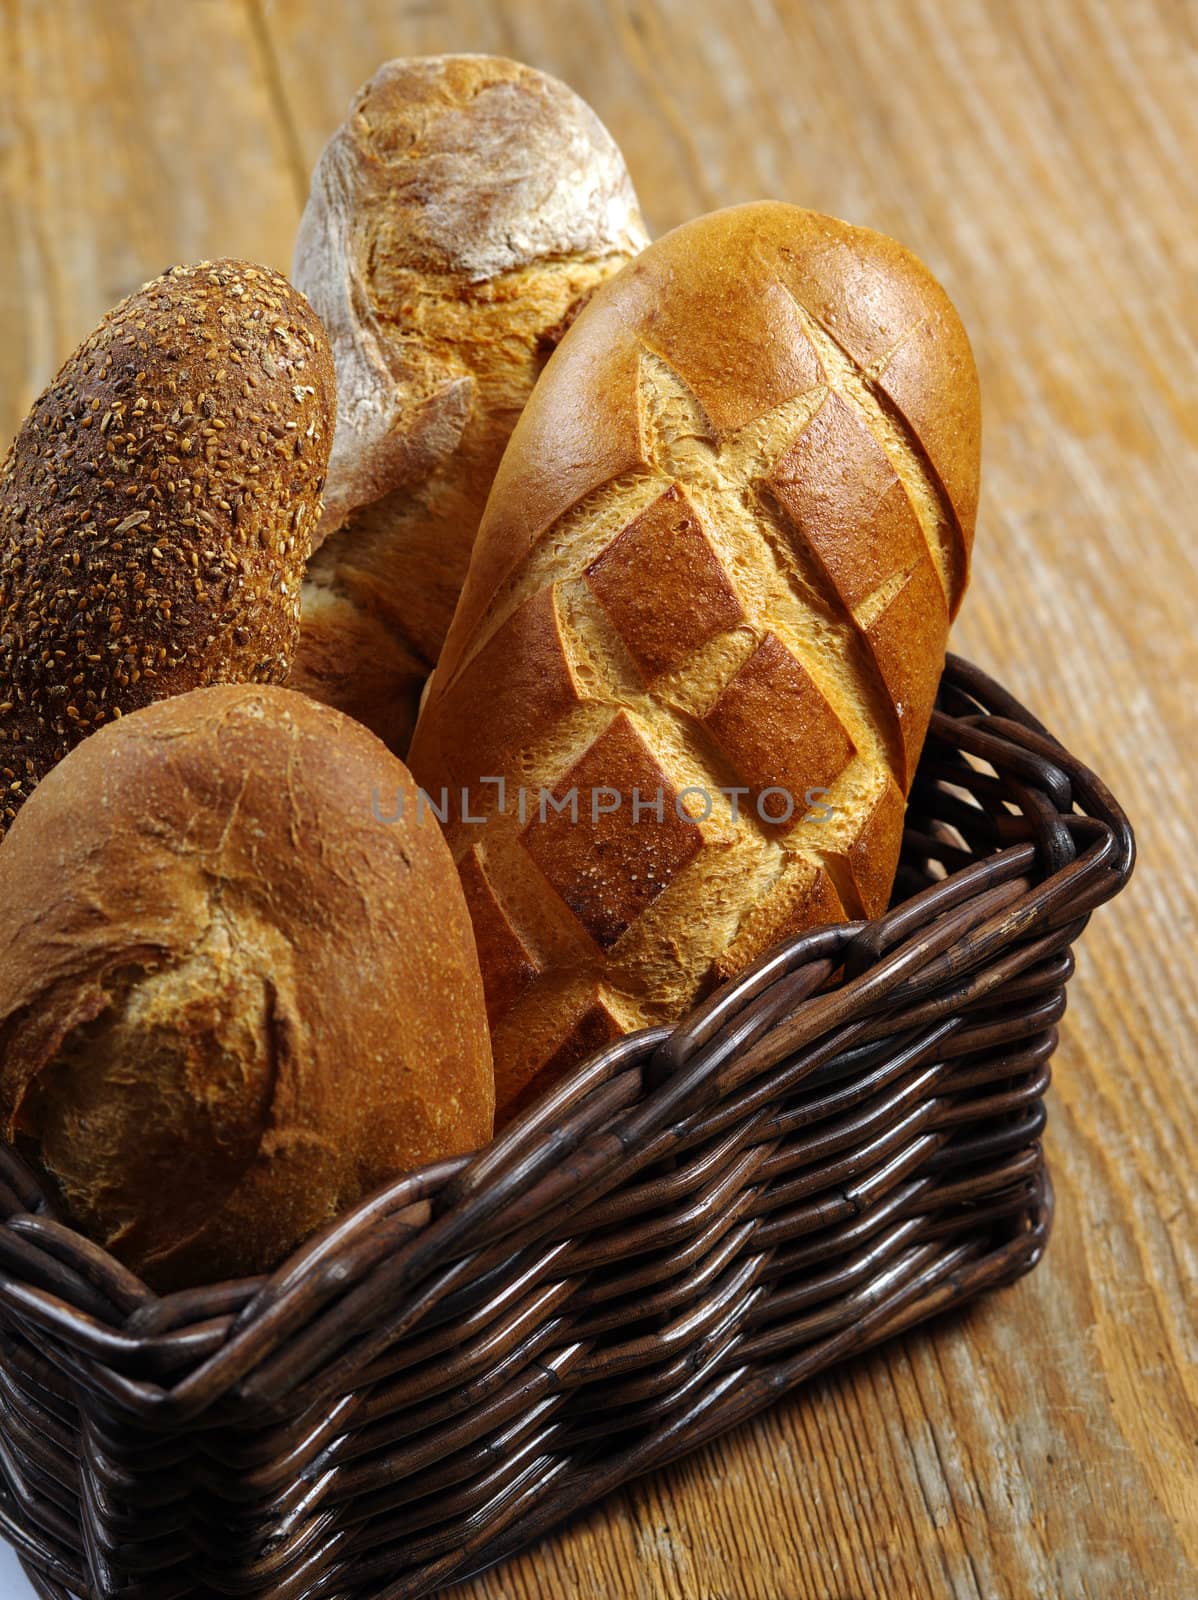 Loaves of bread in a basket by sumners